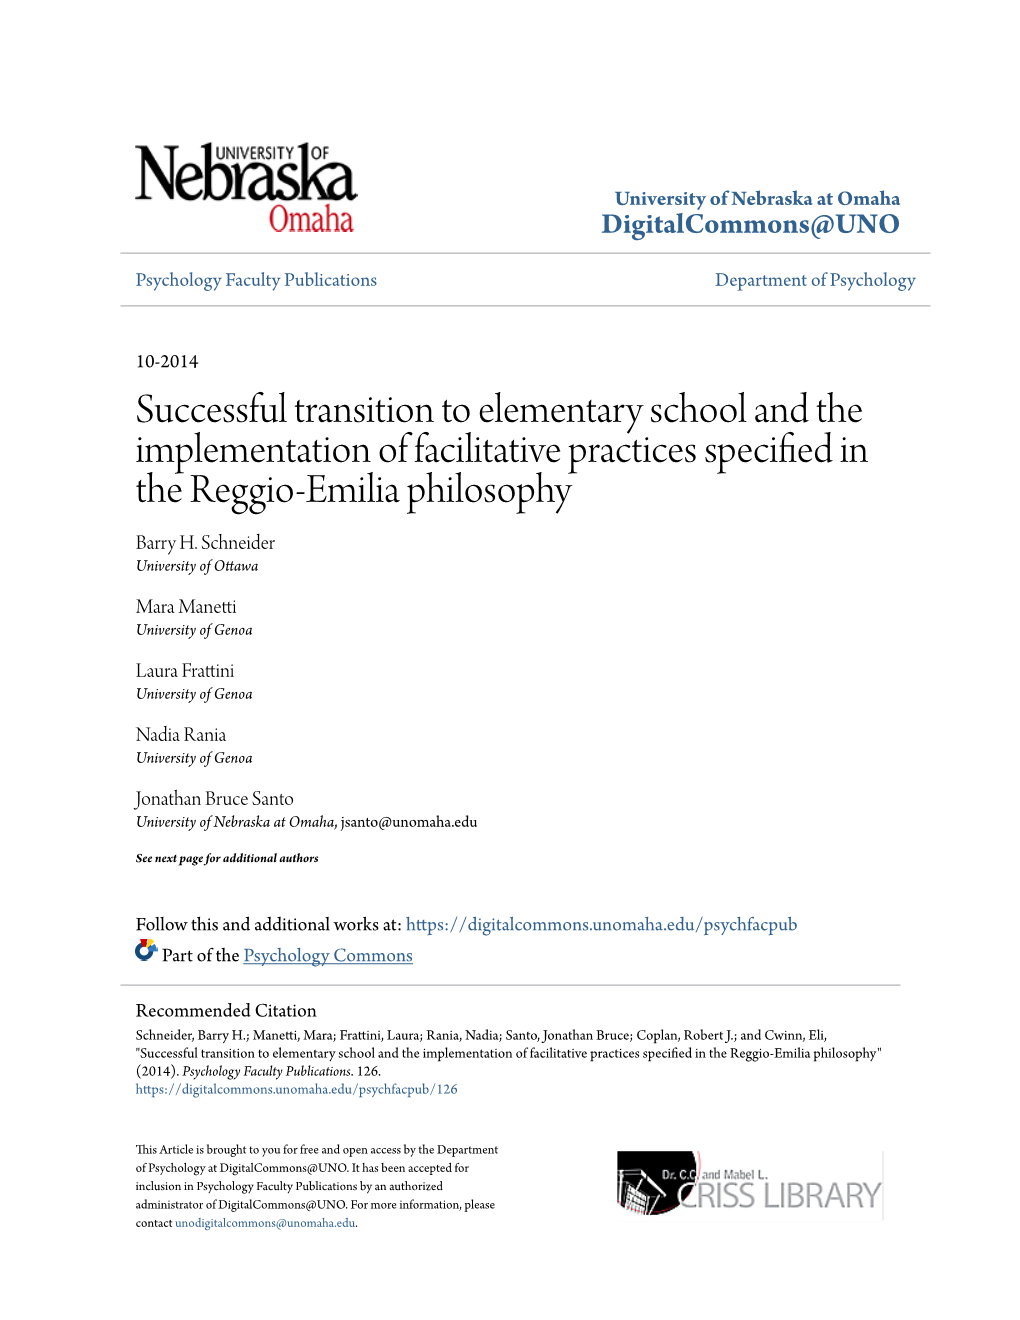 Successful Transition to Elementary School and the Implementation of Facilitative Practices Specified in the Reggio-Emilia Philosophy Barry H